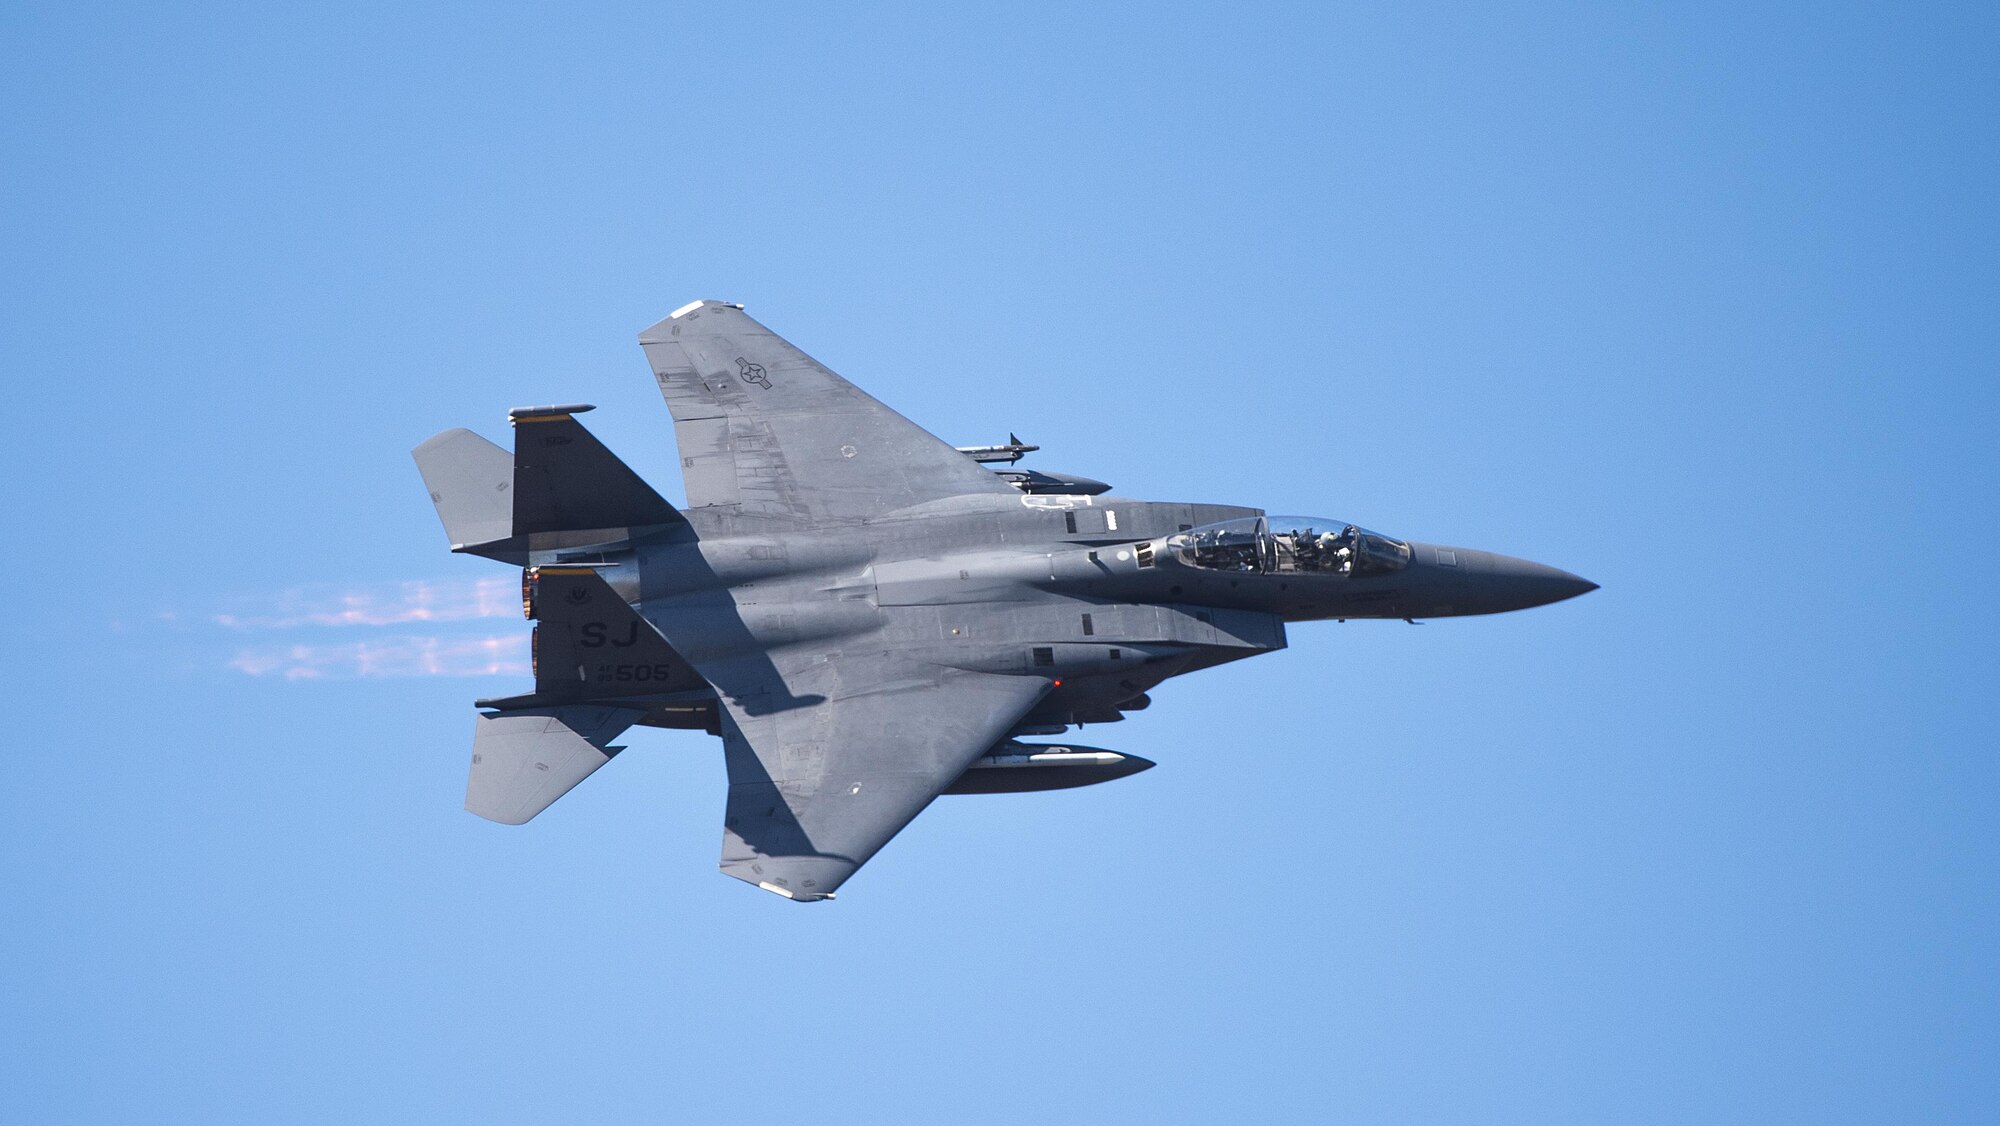 An F-15E Strike Eagle flies over Grand Bay Bombing and Gunnery Range at Moody Air Force Base, Ga., Feb. 11, 2016. Multiple U.S. Air Force aircraft within Air Combat Command conducted joint aerial training that showcased the aircrafts tactical air and ground maneuvers, as well as its weapons capabilities. (U.S. Air Force photo by Staff Sgt. Brian J. Valencia/Released)